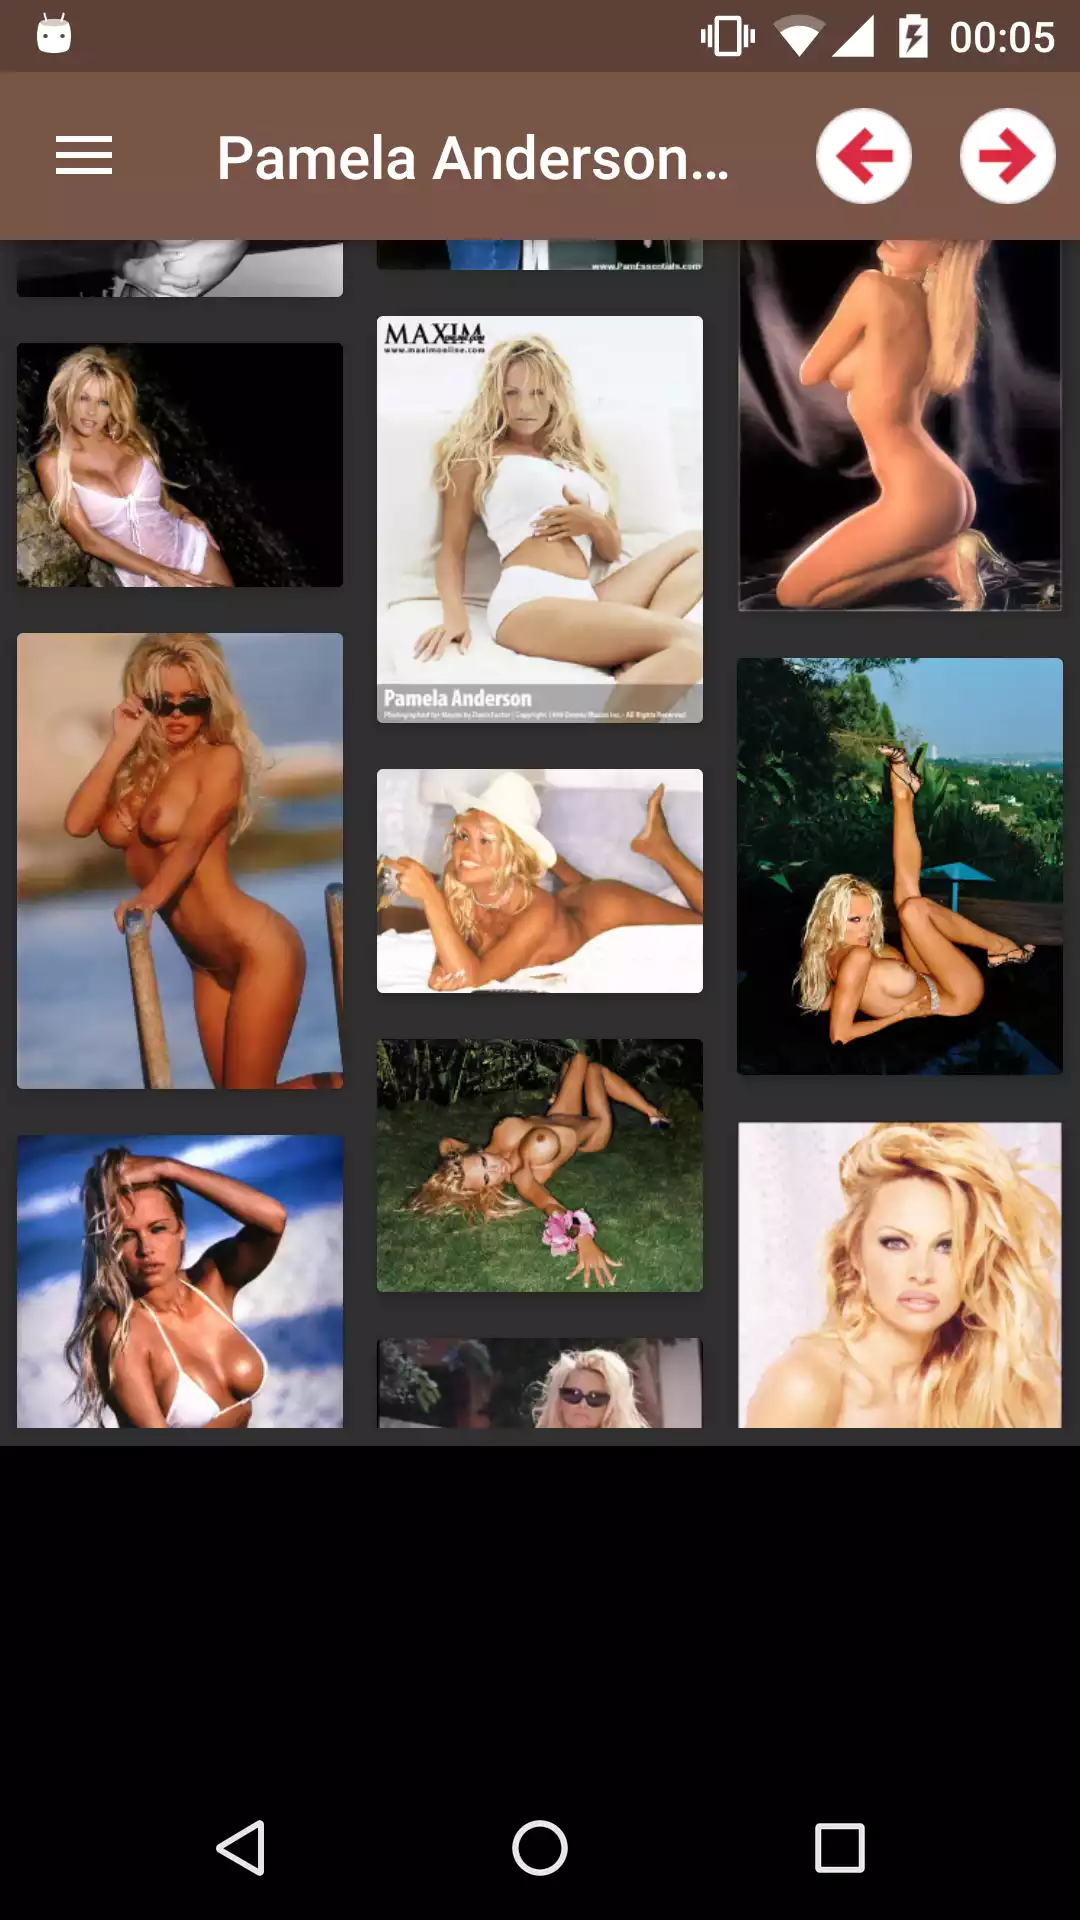 Pamela Anderson backgrounds picture,android,hentai,anderson,aplikasi,porn,photos,erotic,for,pamela,pick,pics,download,backgrounds,henati,pornstar,apps,stars,app,lovely,best,ebony,adult,sexy,wallpapers